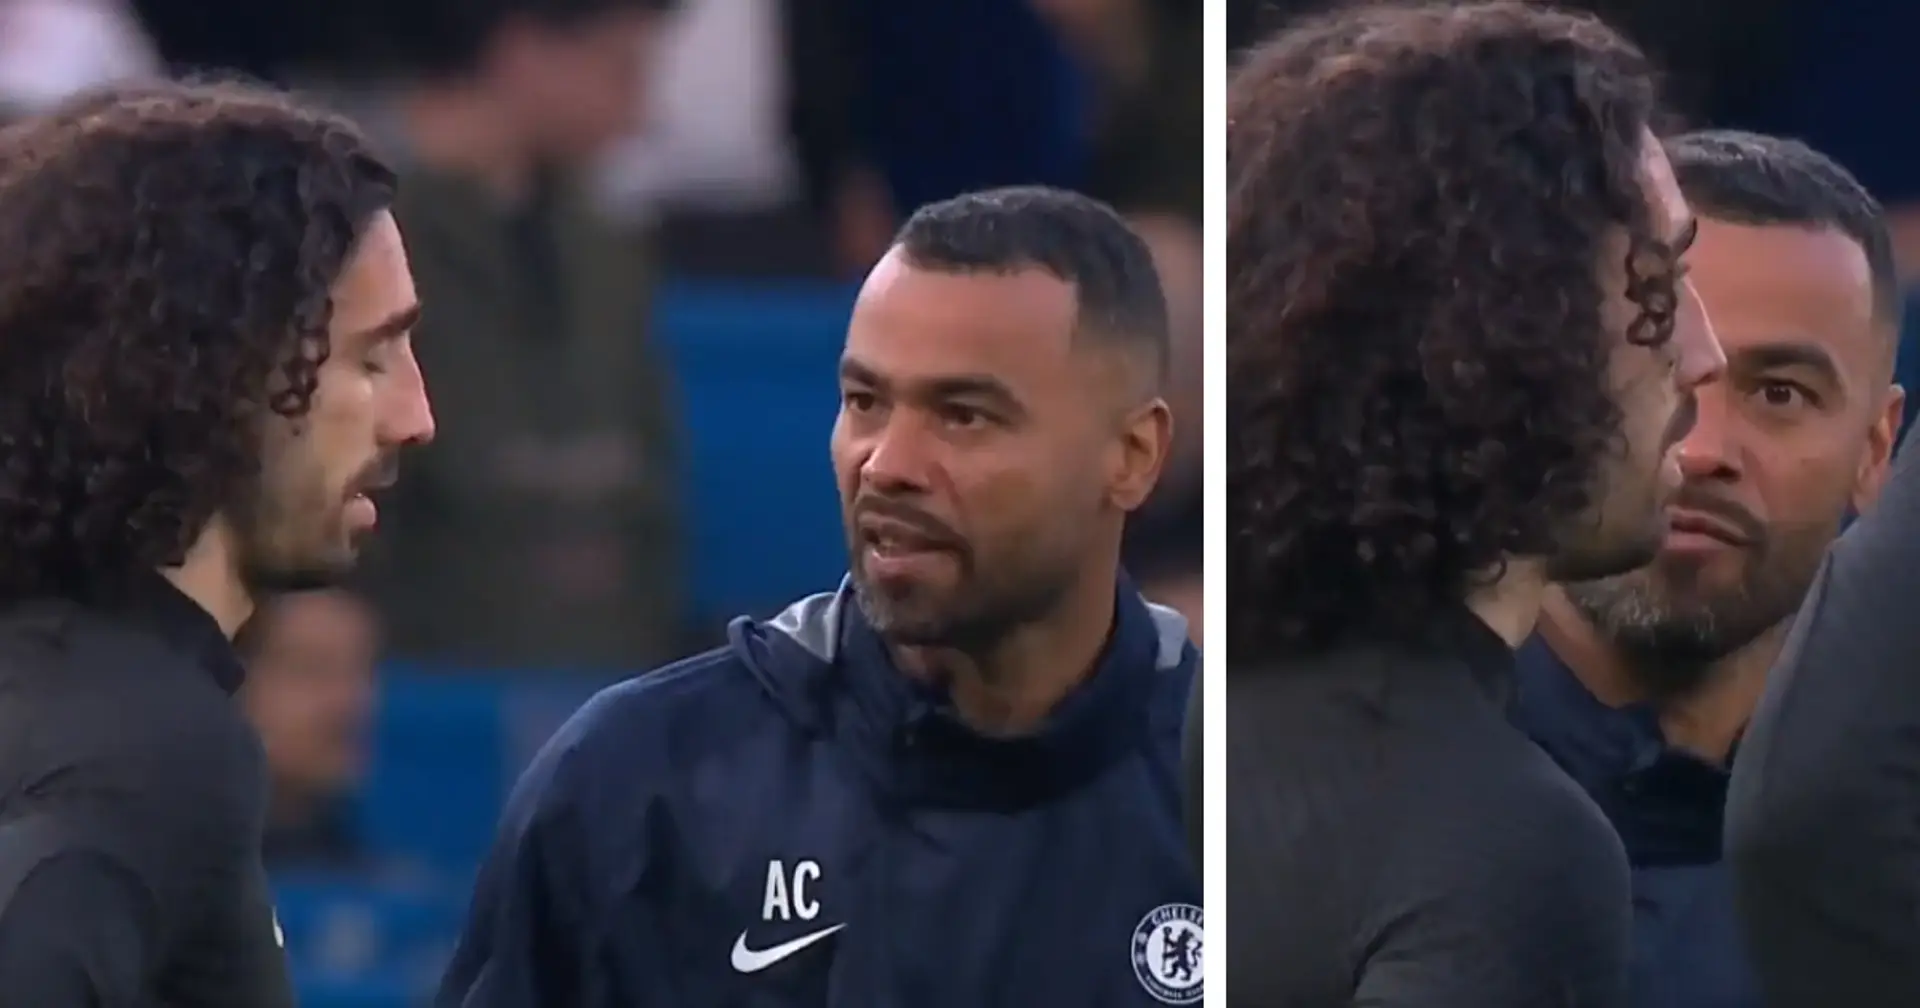 Ashley Cole passionately coaching Cucurella & other defenders before Madrid game - spotted